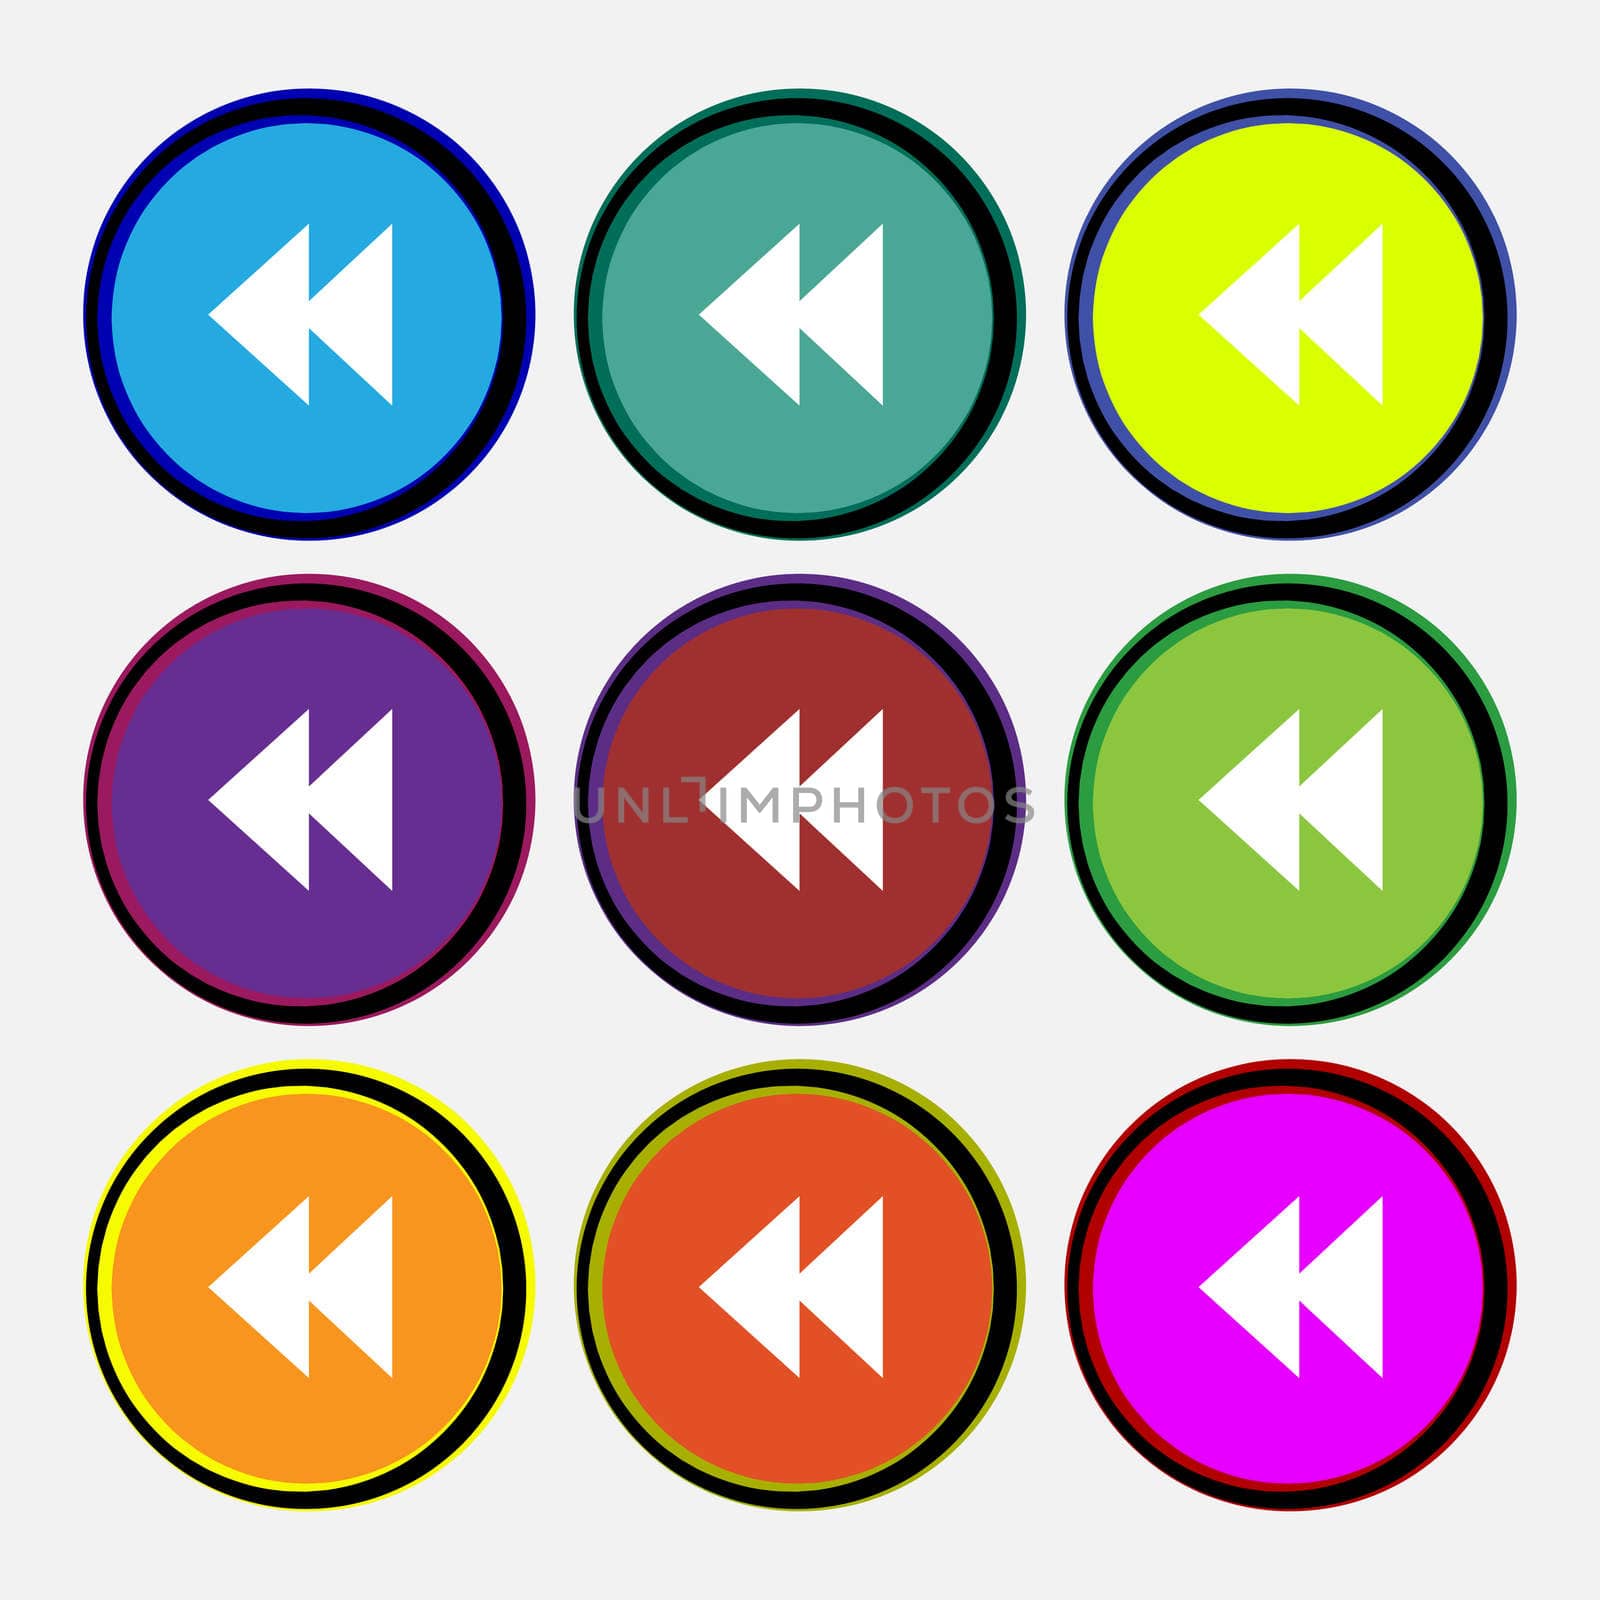 rewind icon sign. Nine multi-colored round buttons. illustration